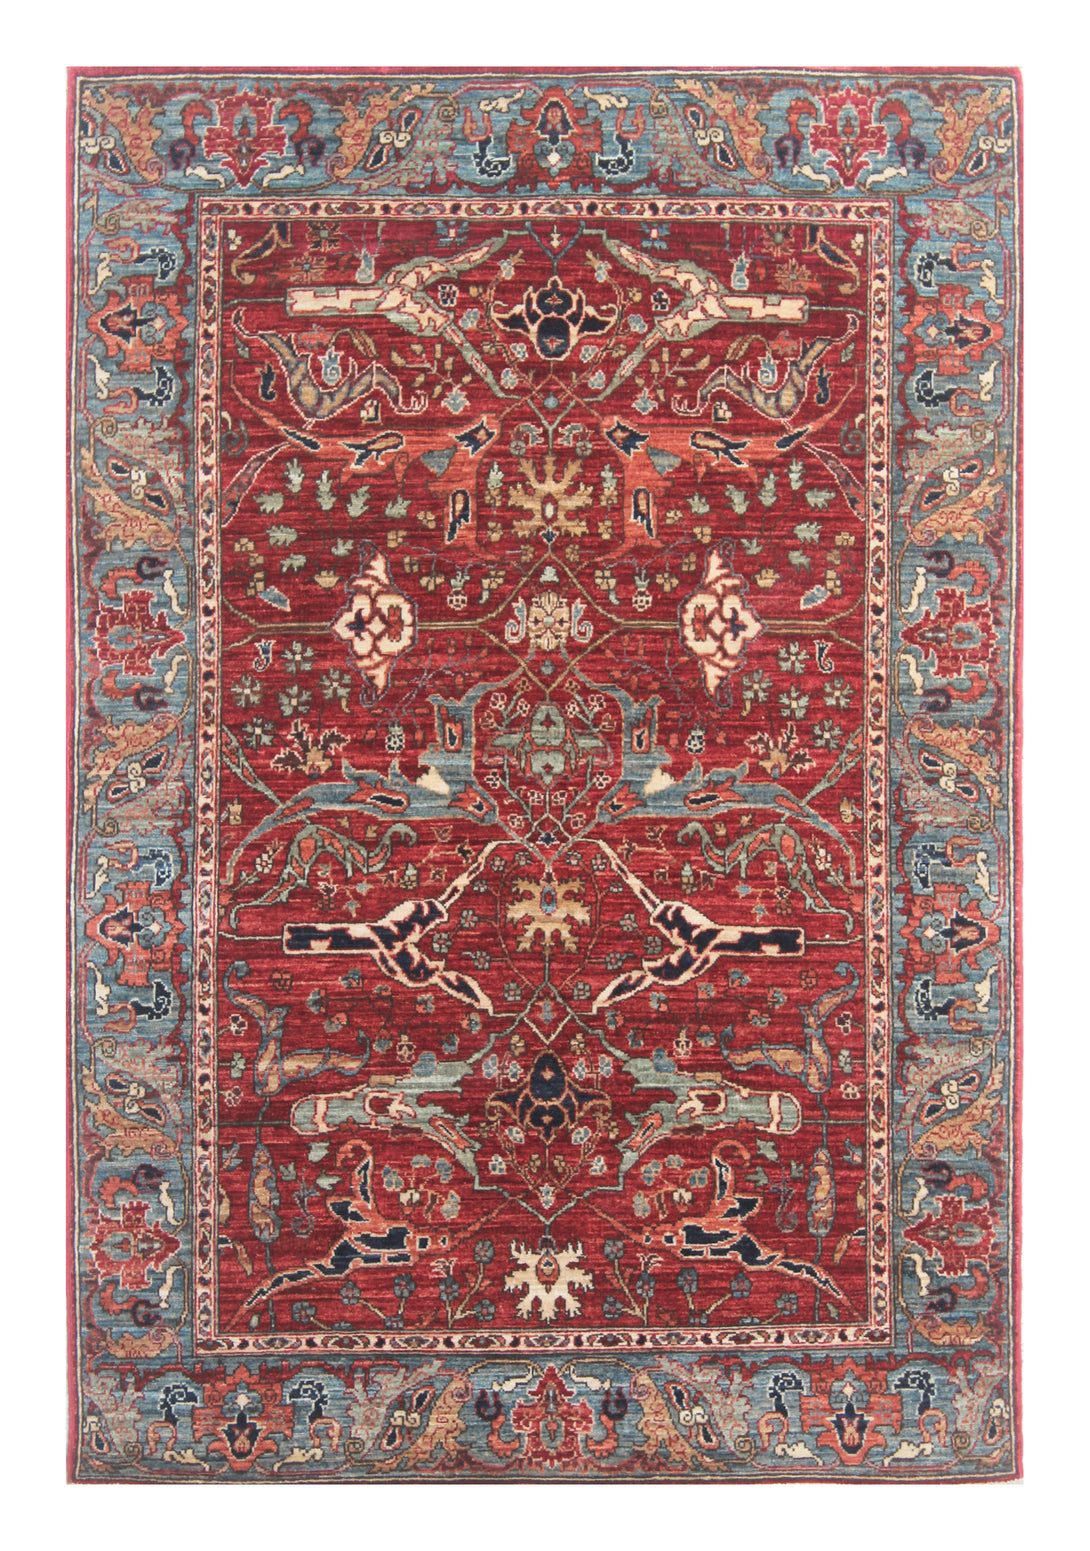 Hand Knotted Afghani Aryana Area Rug > Design# CCFOR231113 > Size: 4'-2" x 6'-3"